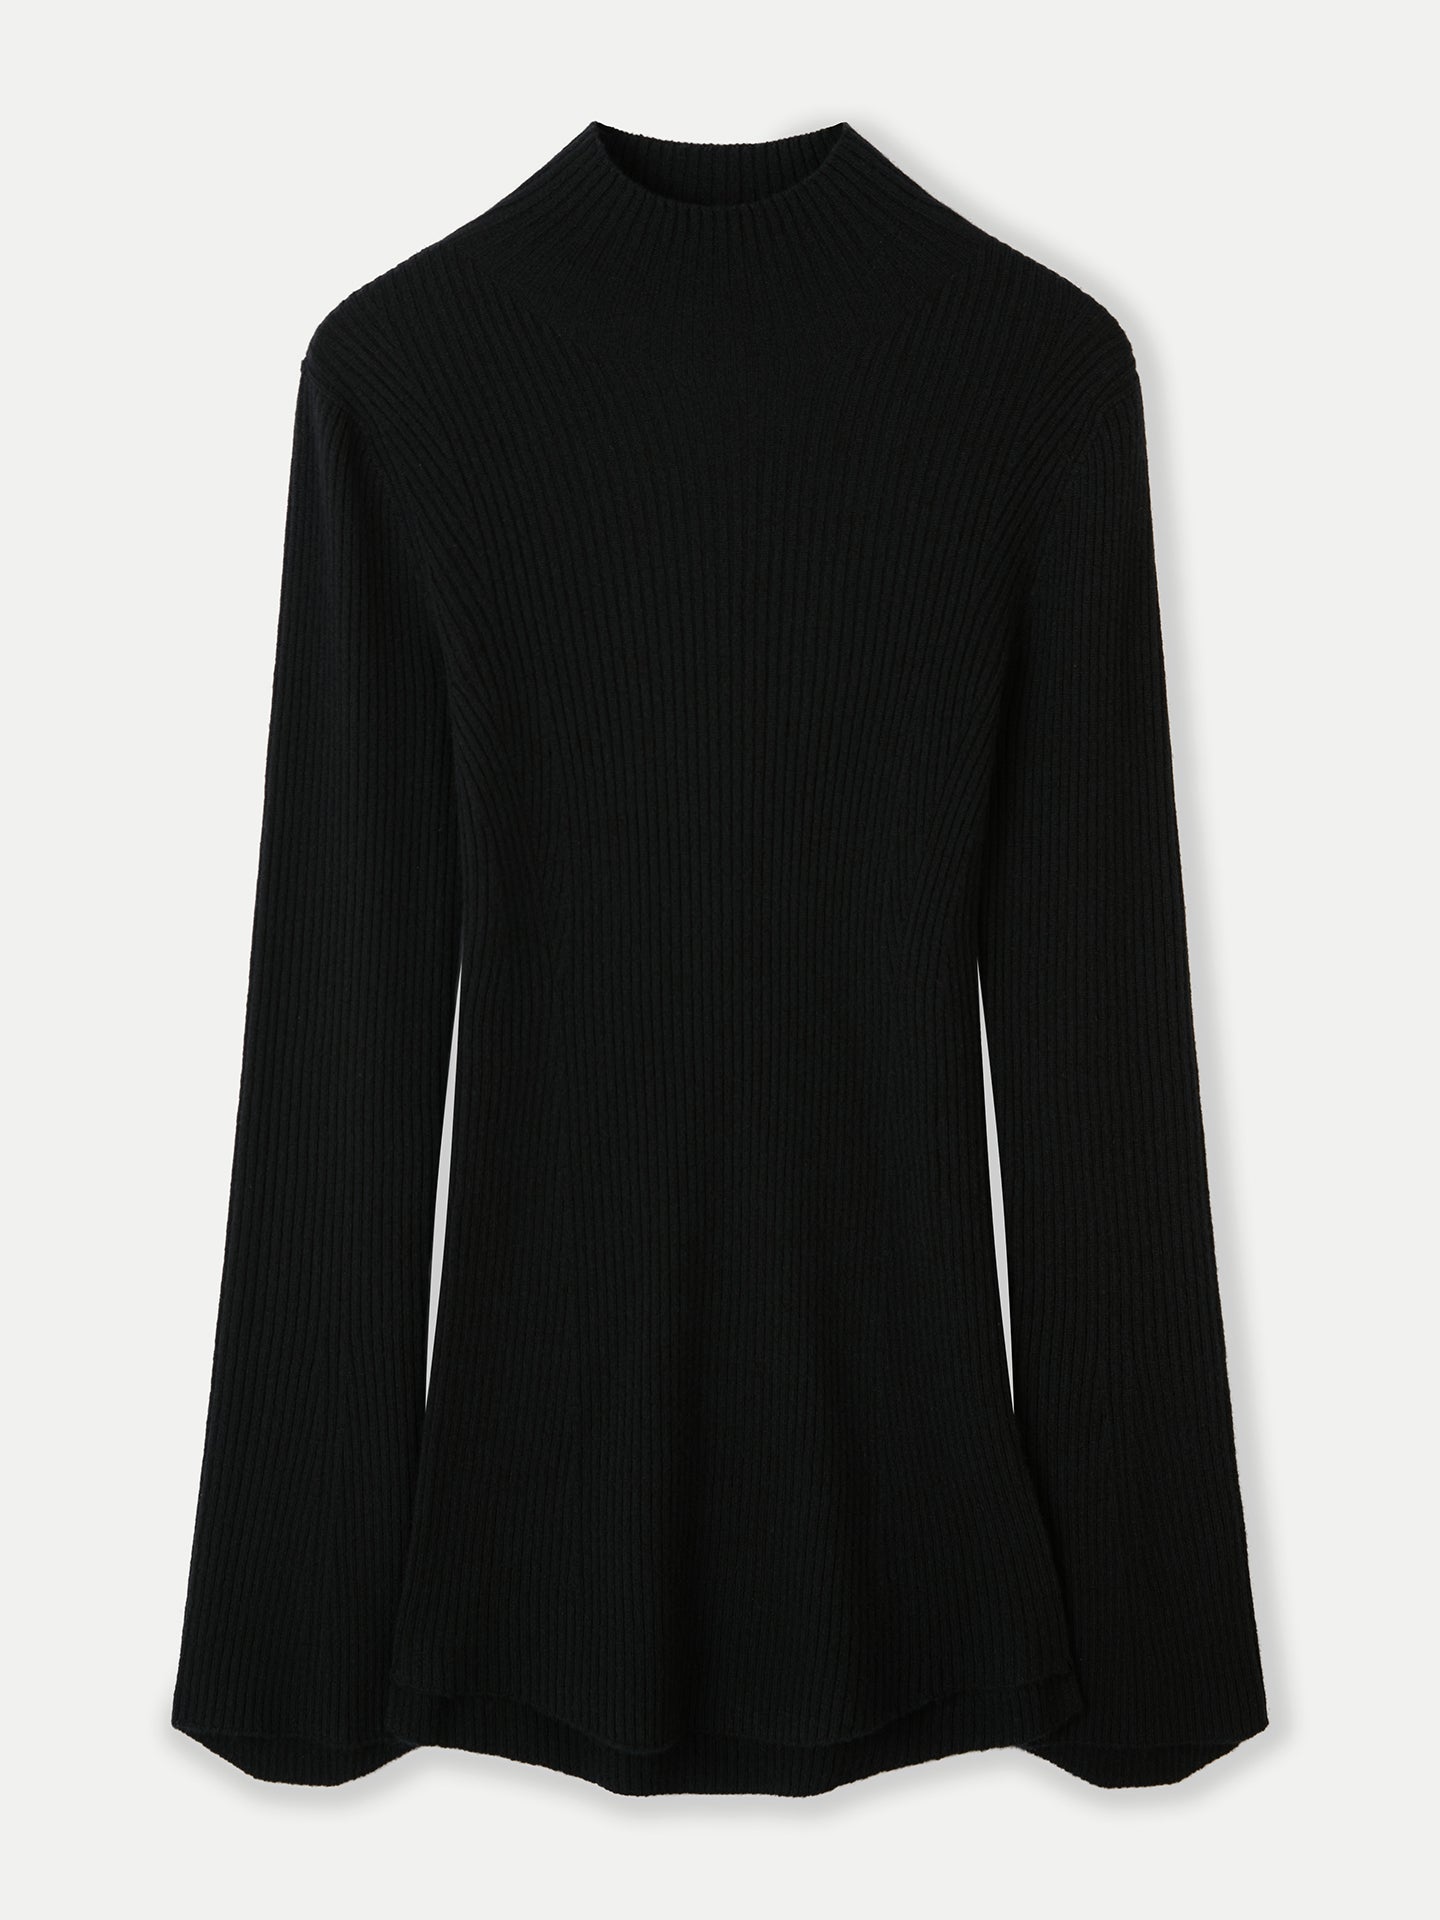 GOBI Cashmere Bell-Sleeve Sweater Black - 3D-Knit Collection